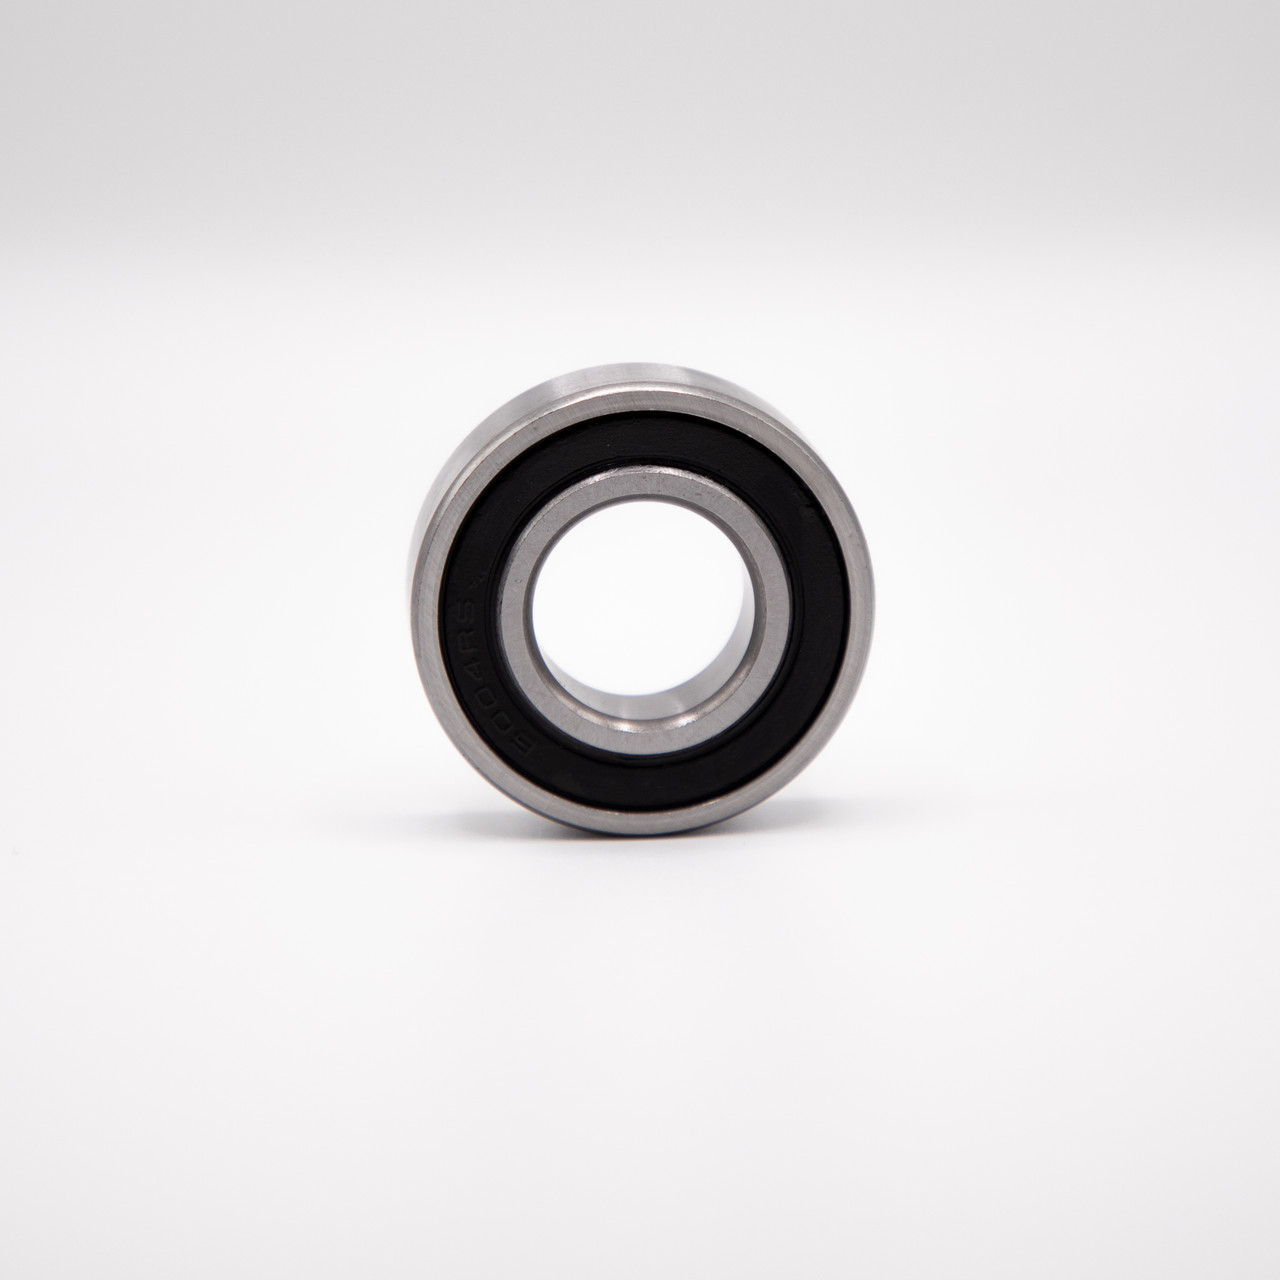 R4-2RS Miniature Ball Bearing 1/4x5/8x0.196 Front View